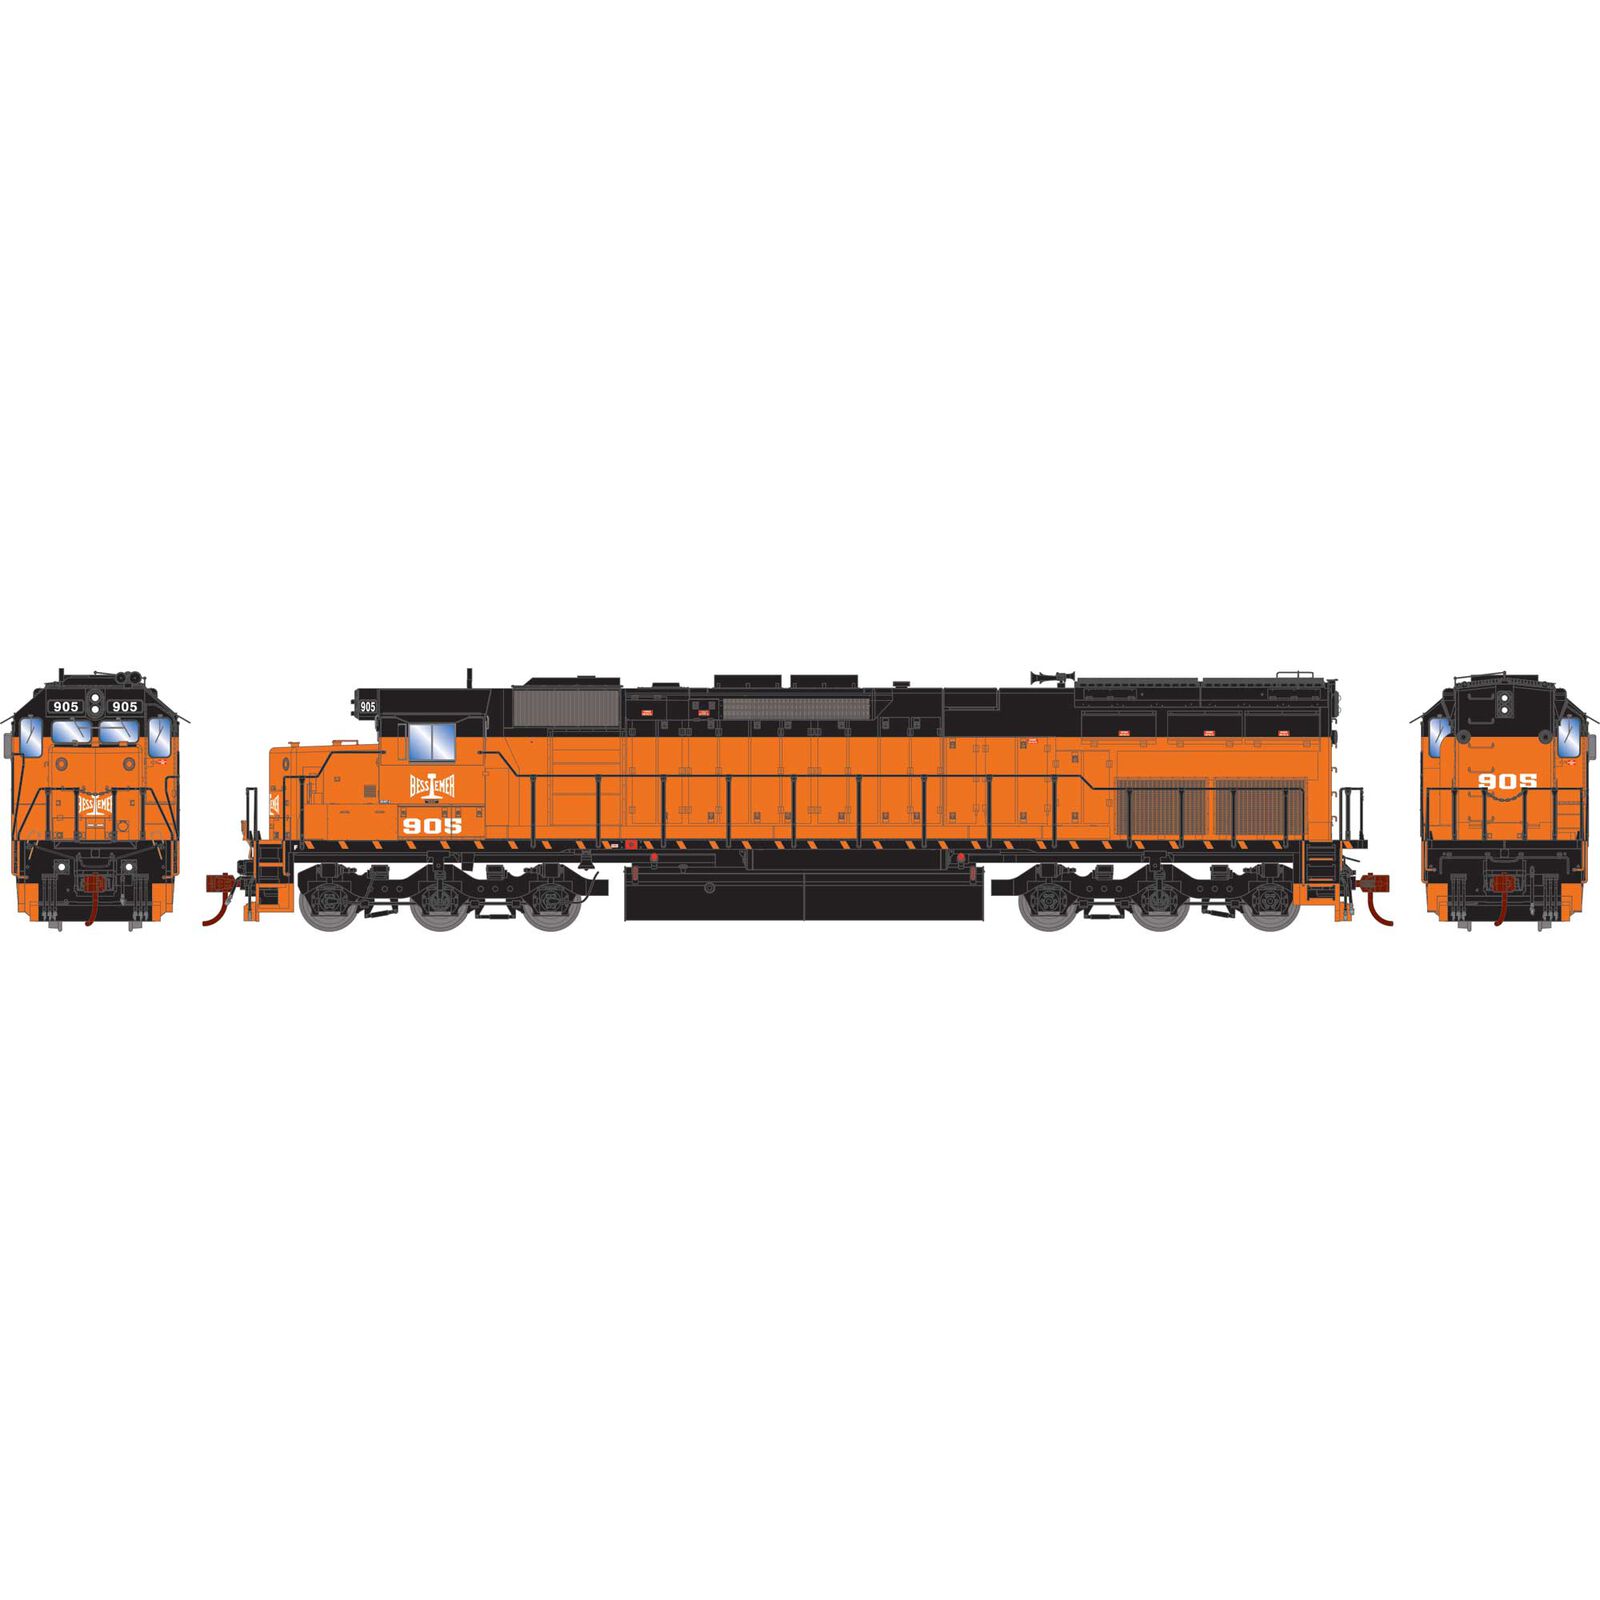 HO SD45T-2 Locomotive with DCC & Sound, Bessamer & Lake Erie #905